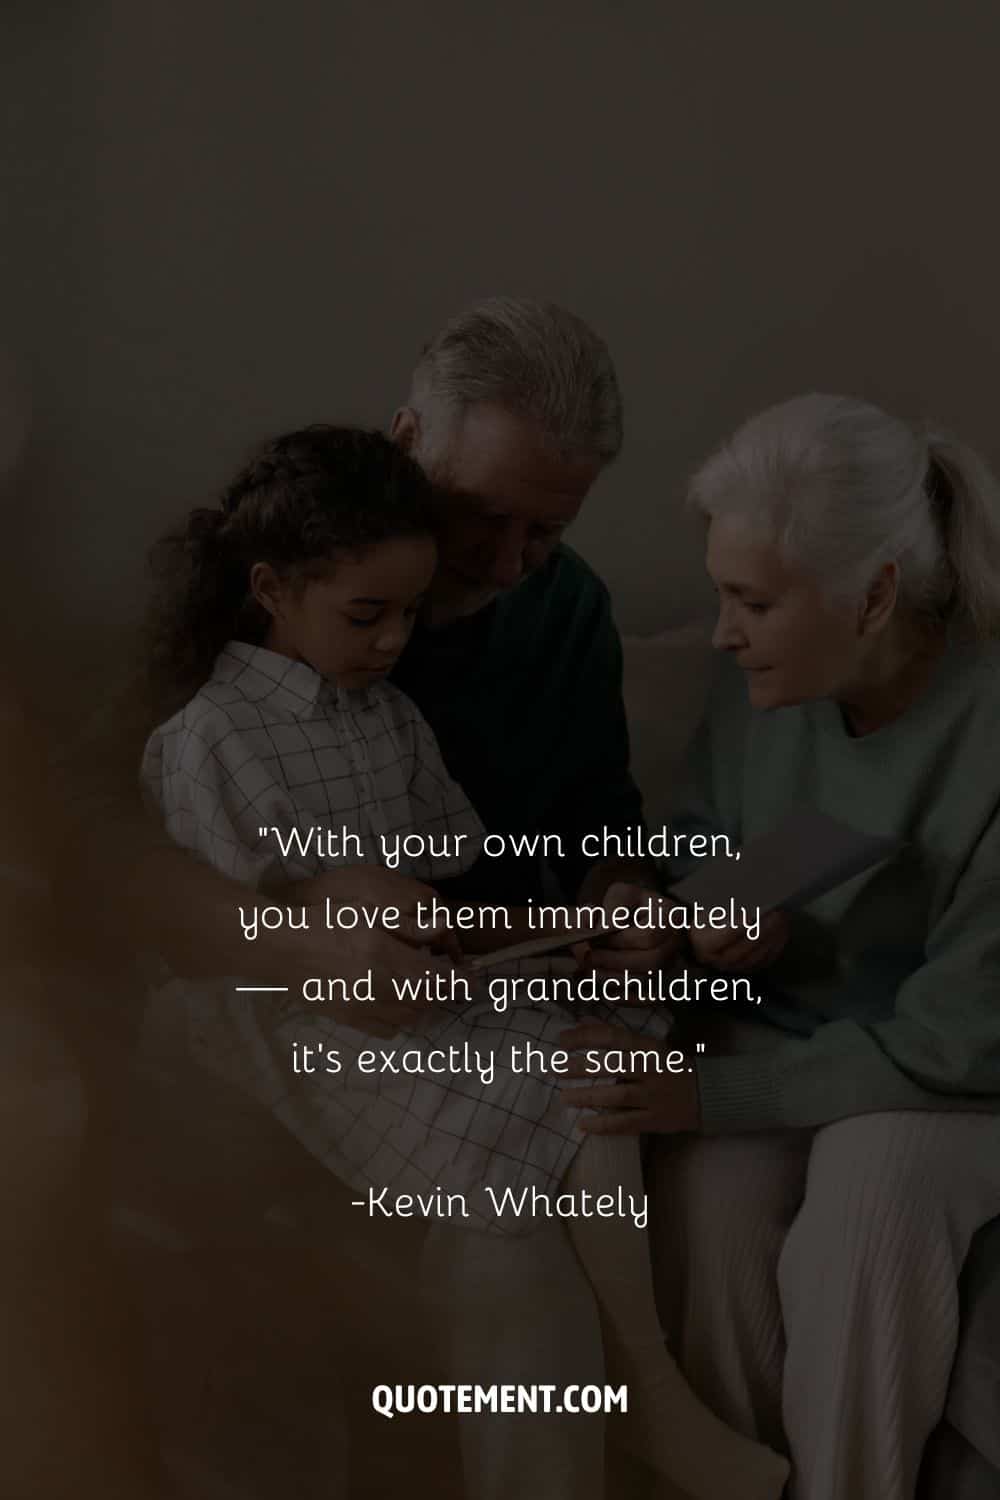 granddad holds his granddaughter with grandma next to them representing quote about grandchildren love